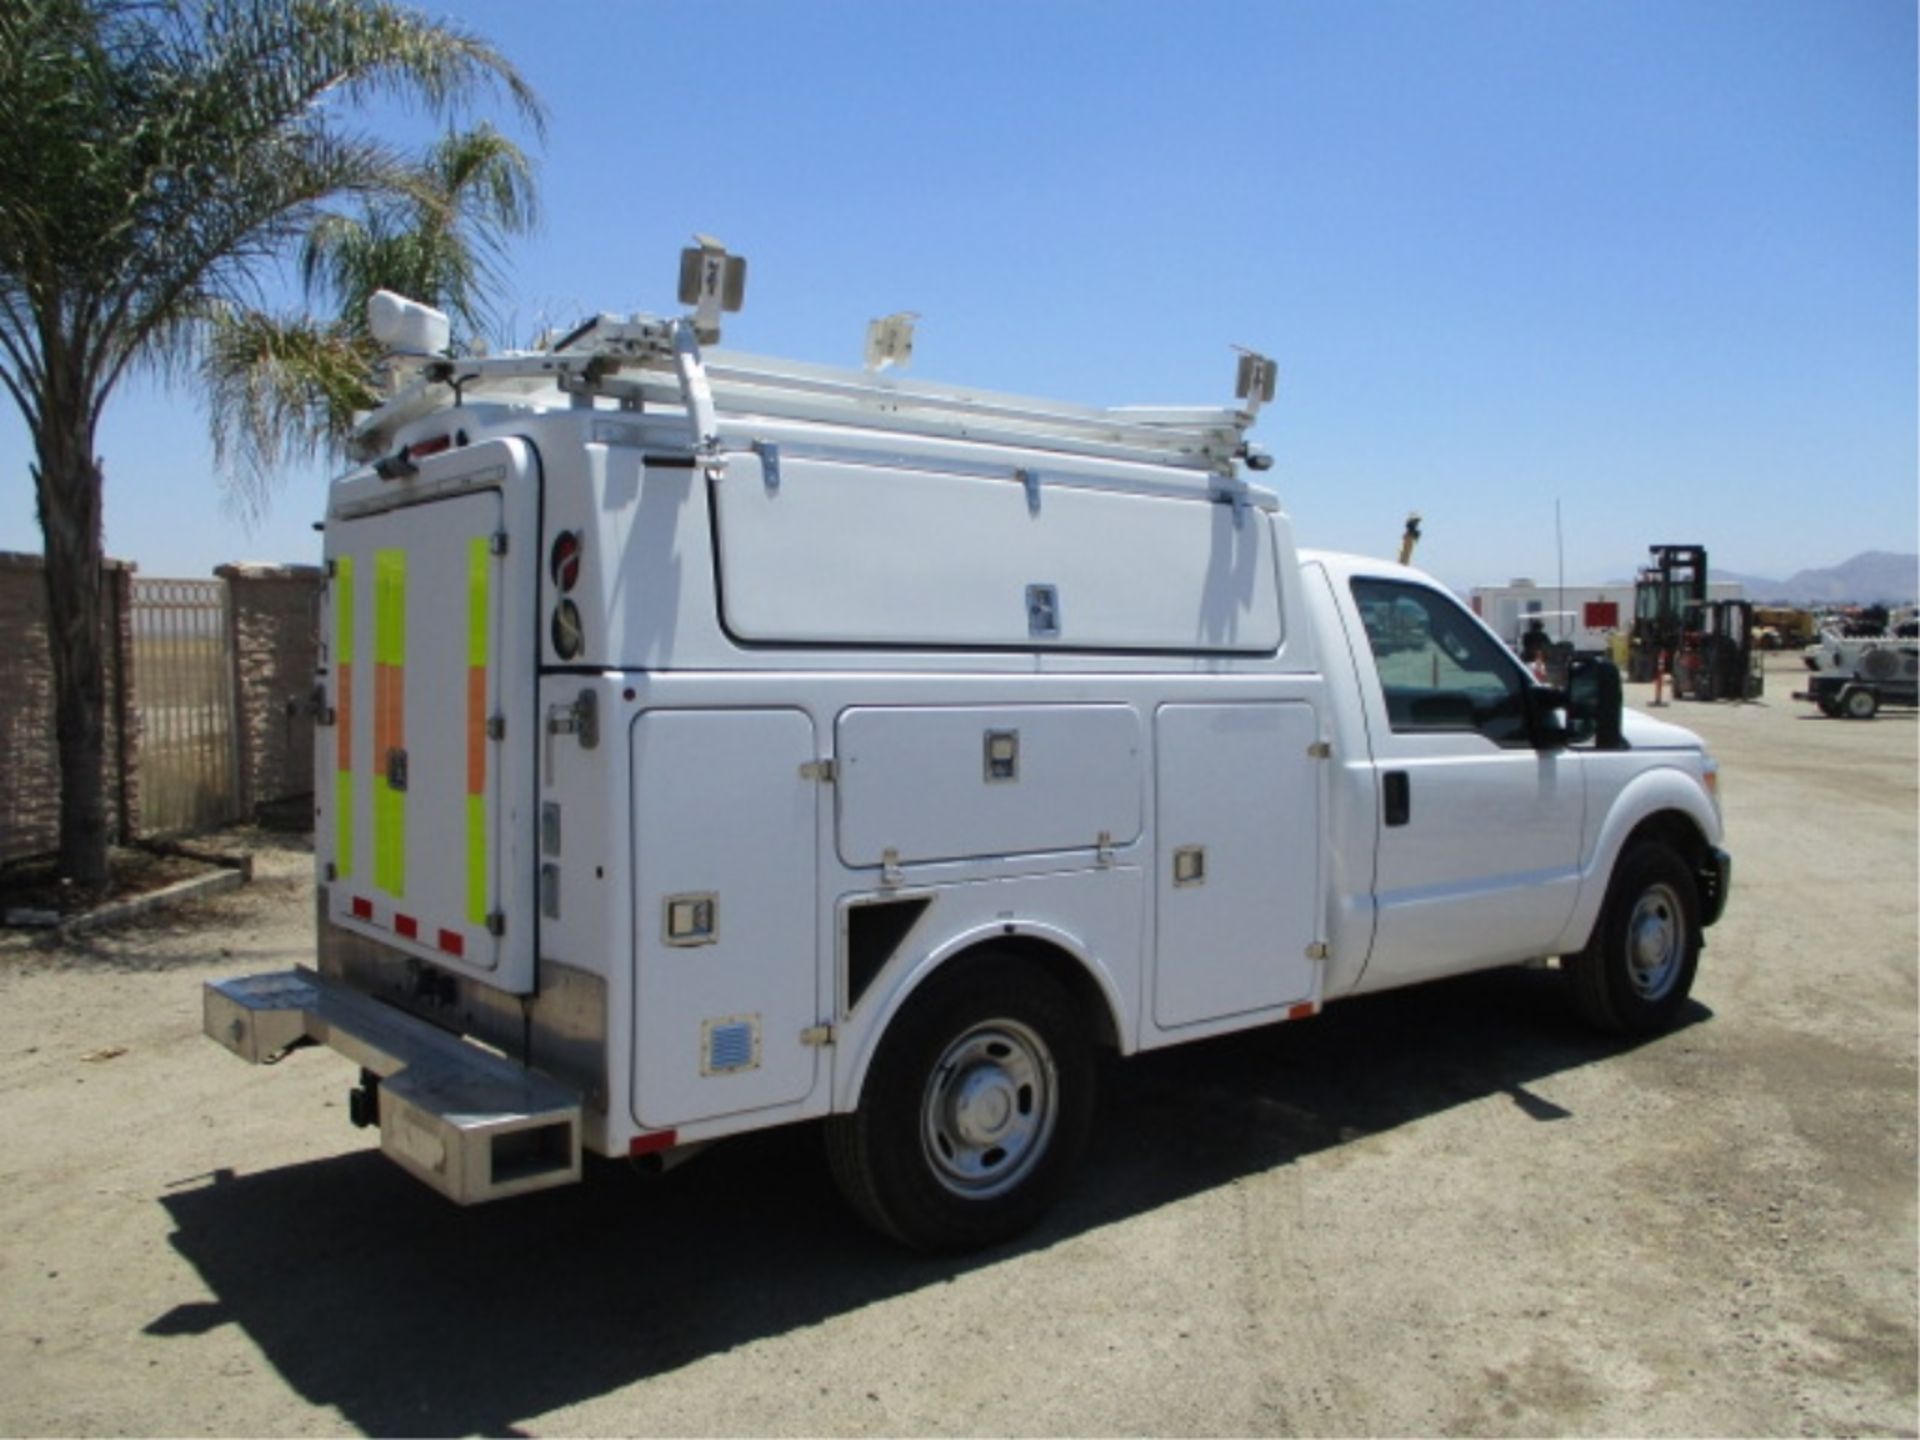 2013 Ford F350 SD Utility Truck, 6.2L V8 Gas, Automatic, Enclosed Utility Body, Onan Gas - Image 21 of 84